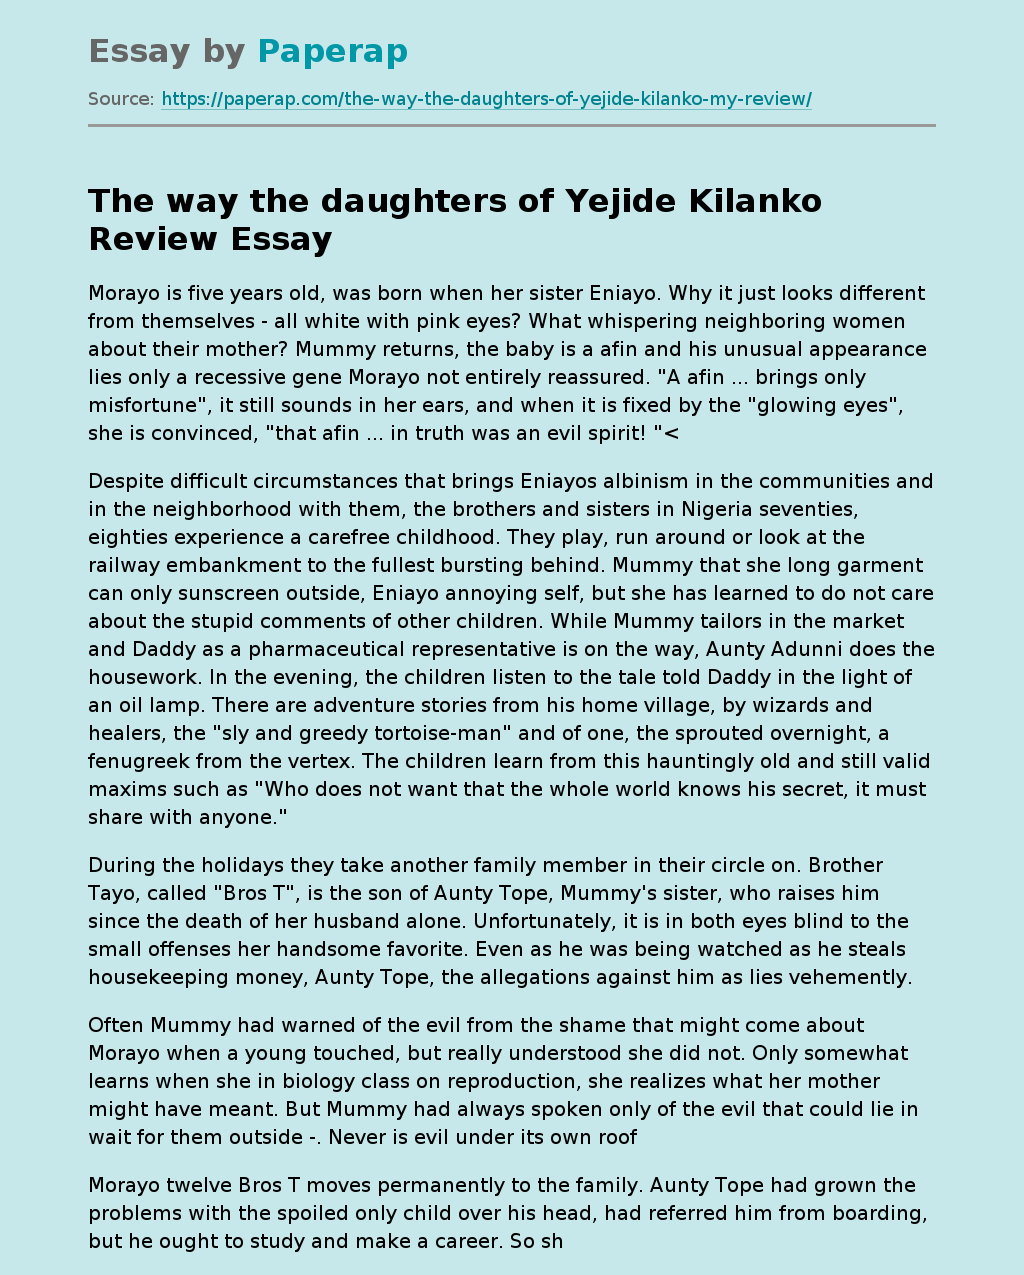 The way the daughters of Yejide Kilanko Review